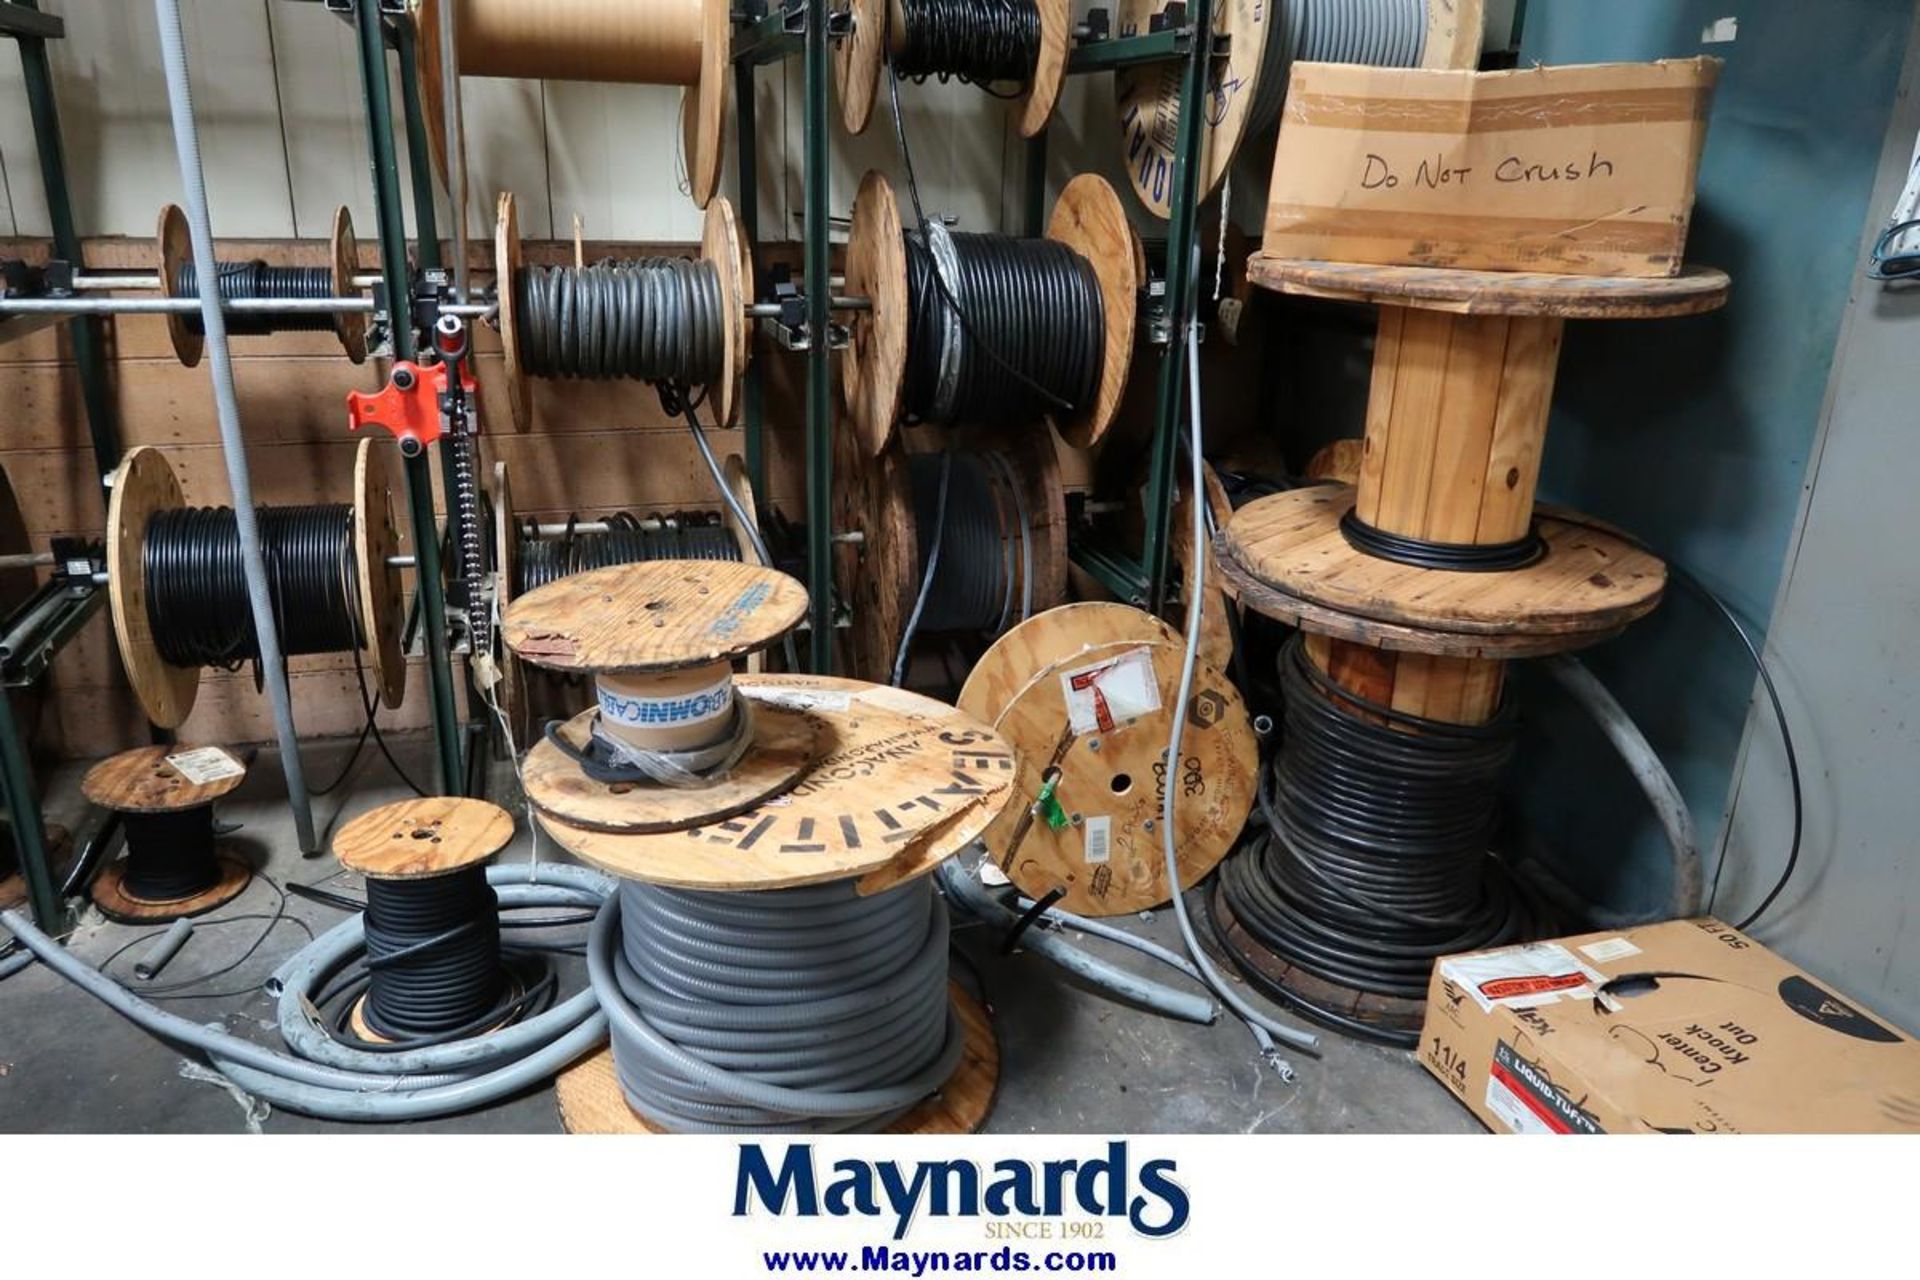 Sections of Steel Wire Rack with Contents of Wire Spools - Image 5 of 8